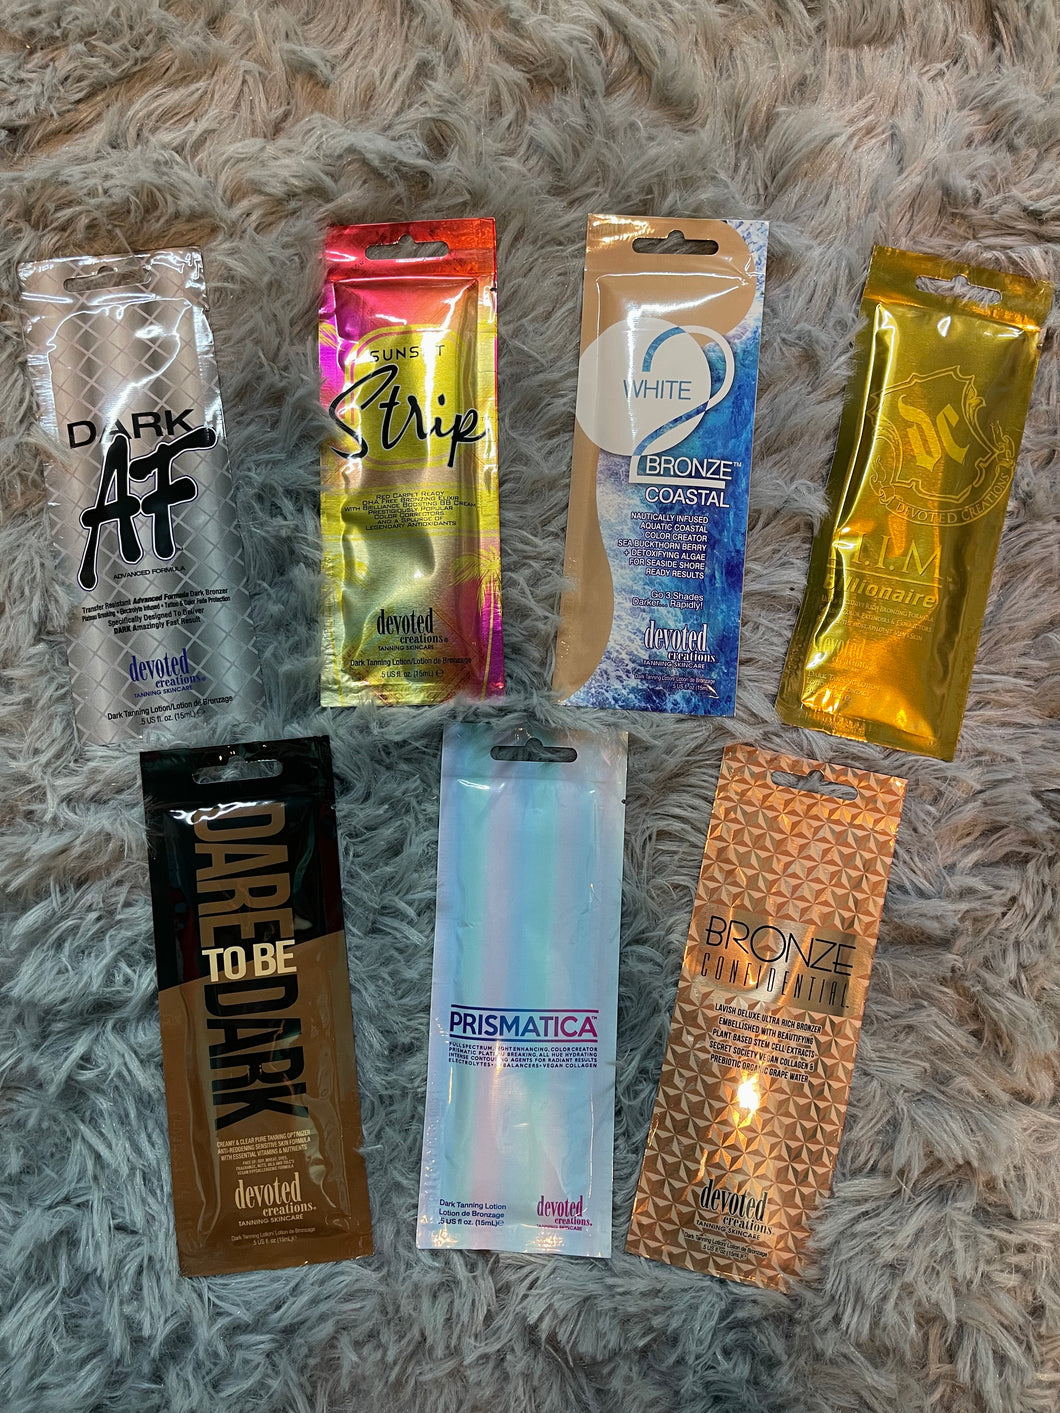 DC Tanning Lotion Samples